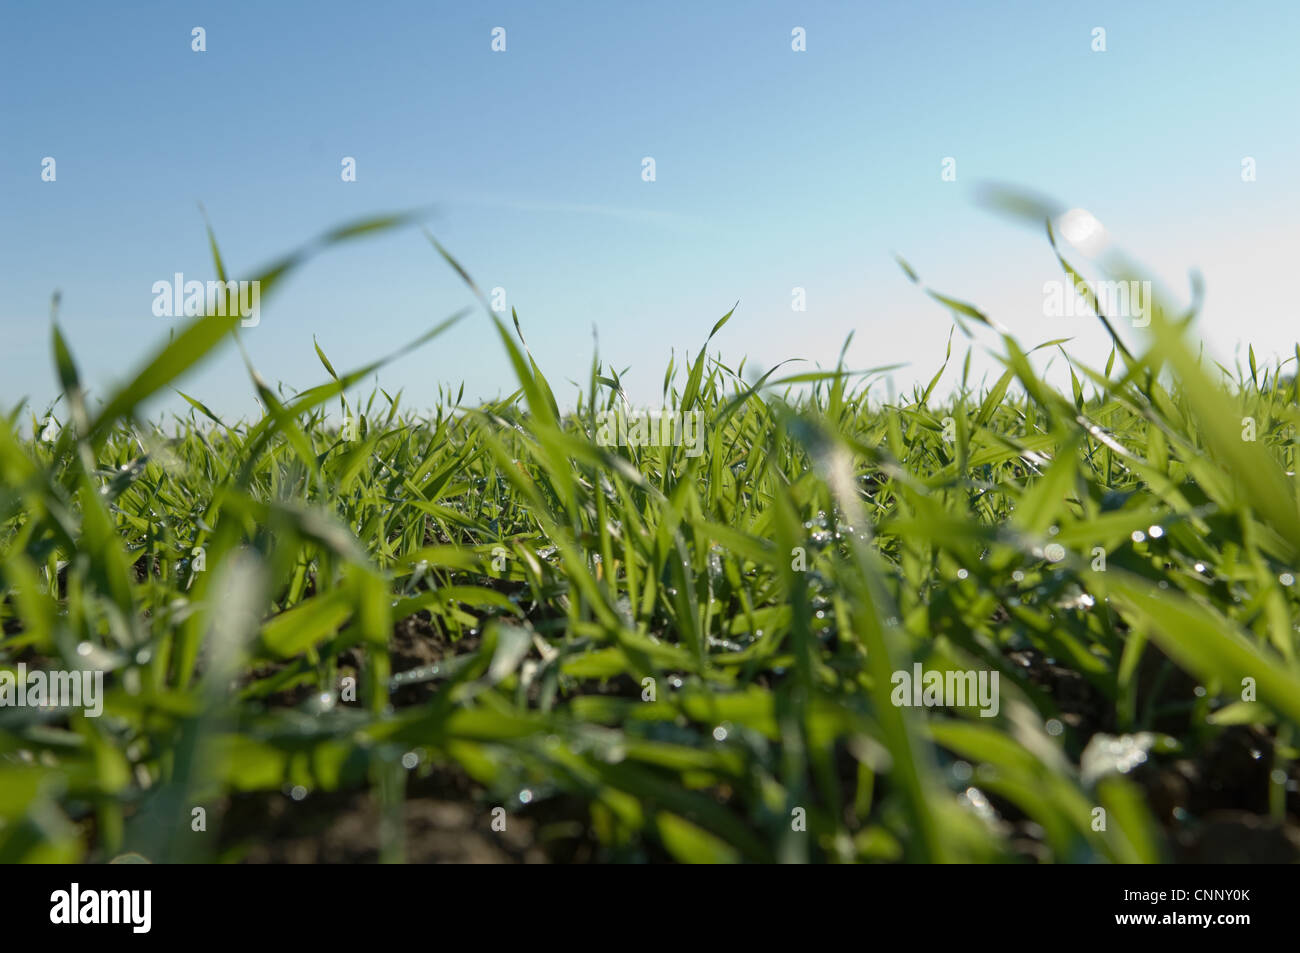 Close up of tall grass in field Banque D'Images